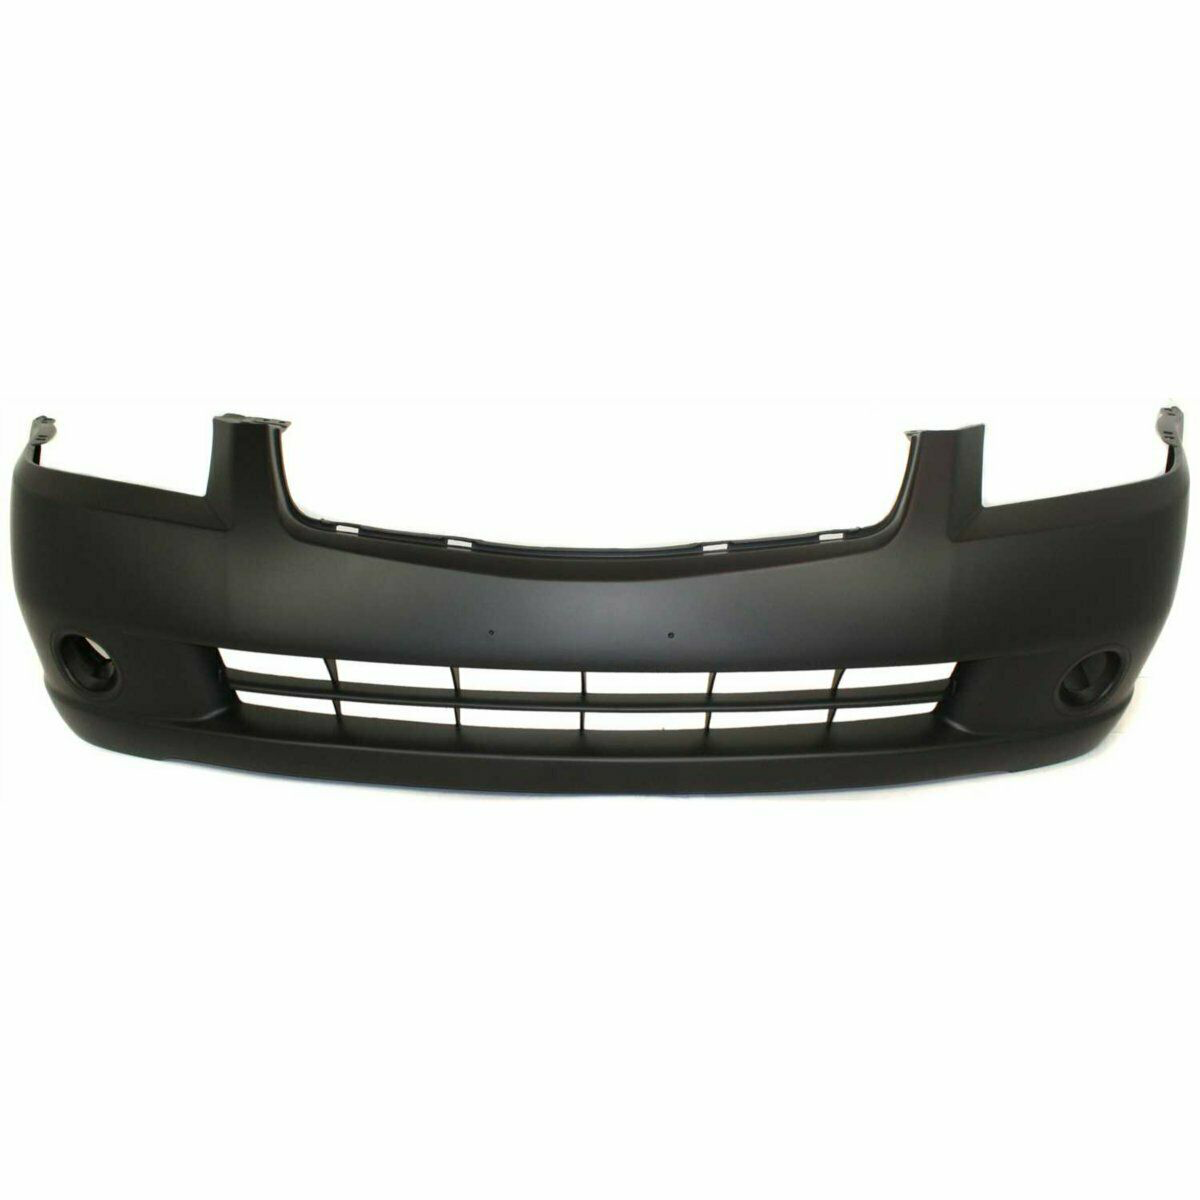 2005-2006 Nissan Altima Front Bumper Painted to Match